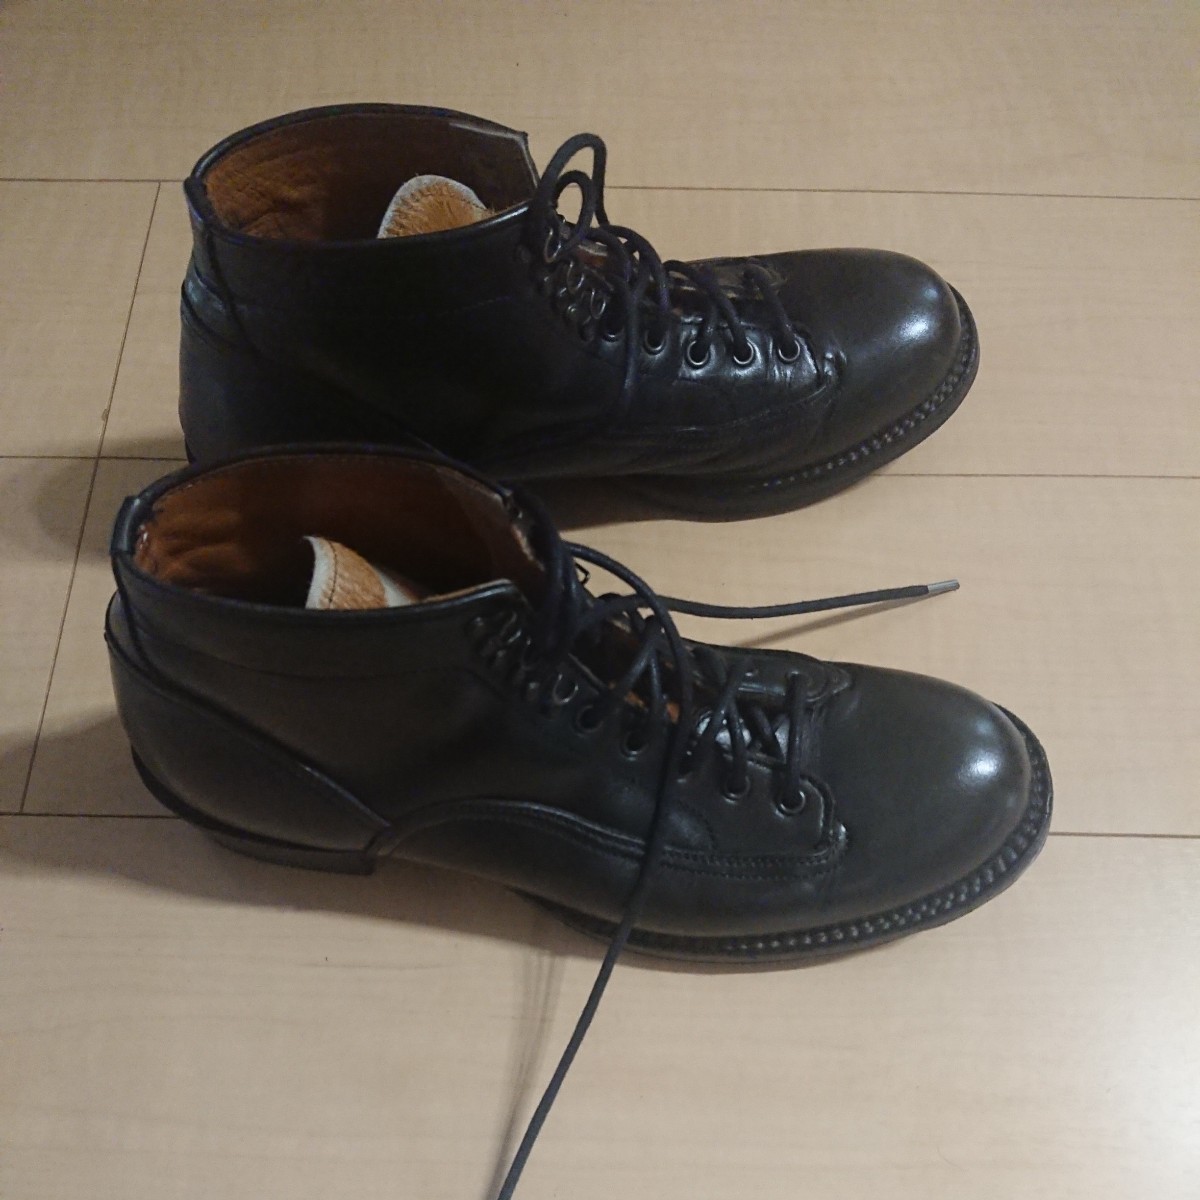 rolling dub trio low ring Dub Trio boots leather shoes 7 25cm